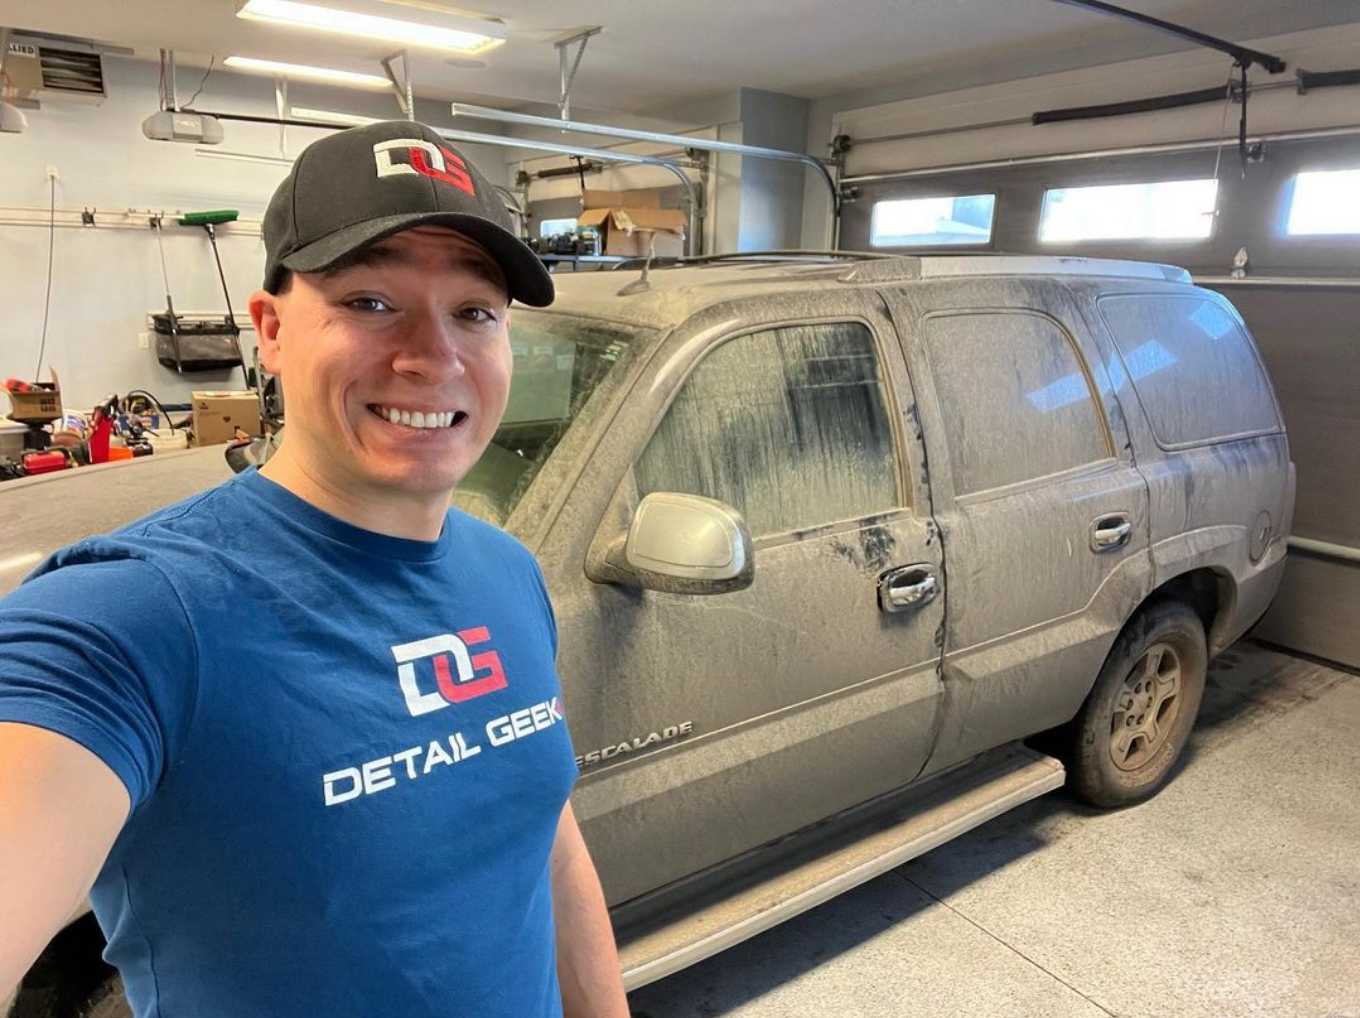 The Detail Geek with the abandoned Cadillac Escalade. He knows that the best way to sell his line of detailing products is to show transformation first.